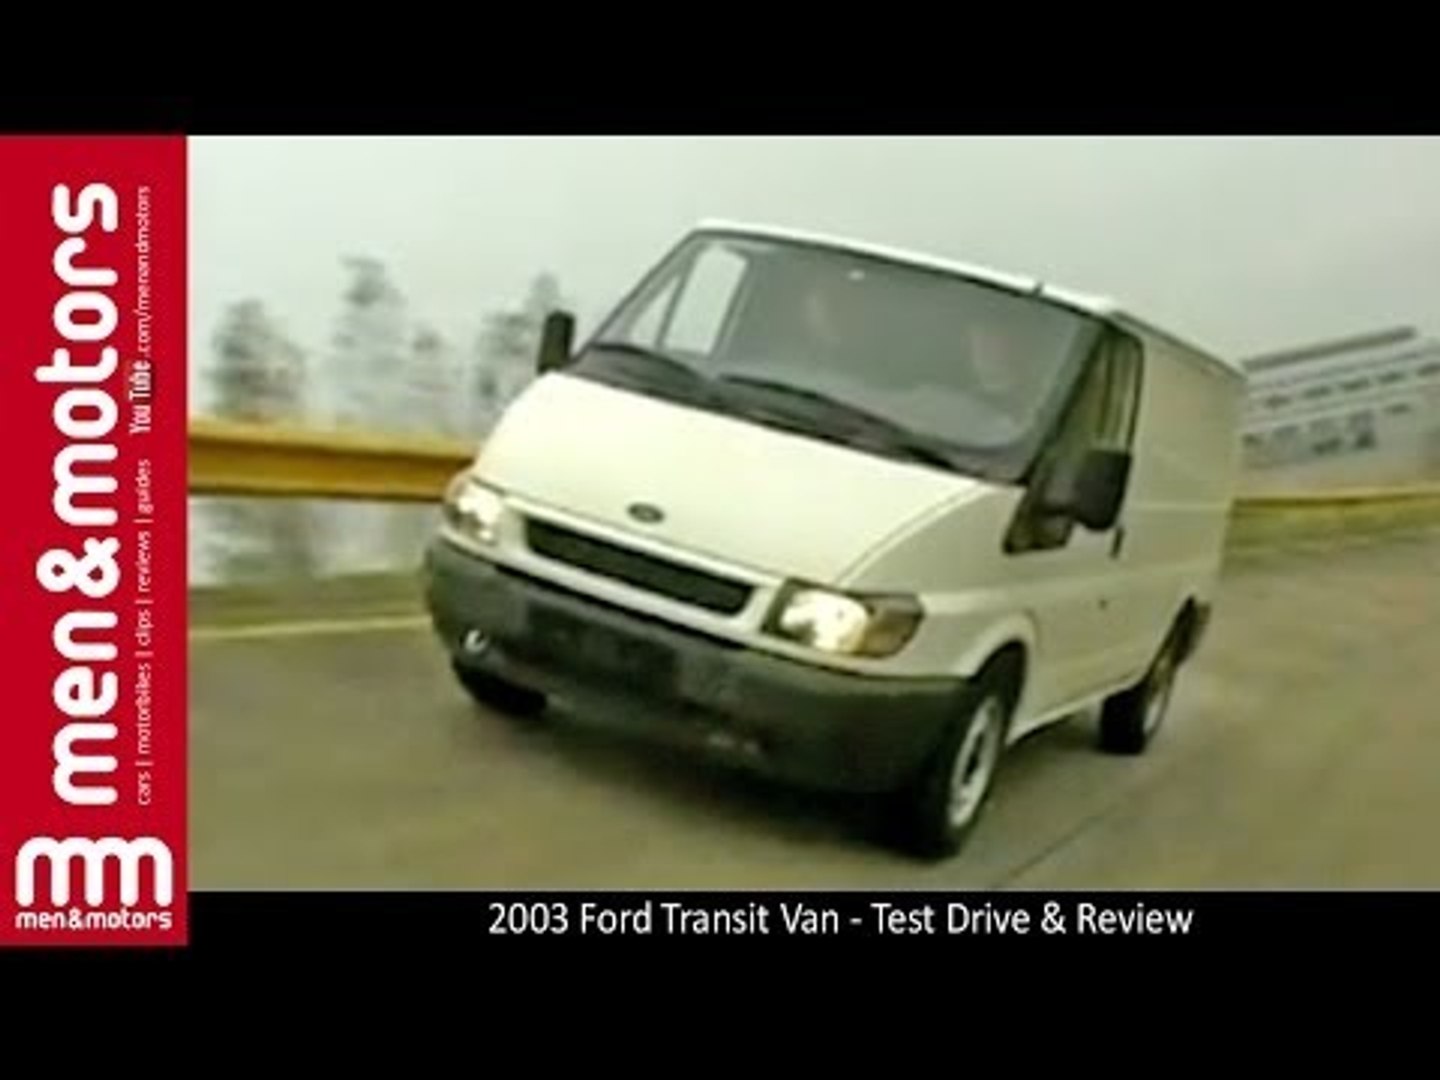 2003 Ford Transit Van - Test Drive & Review - video Dailymotion